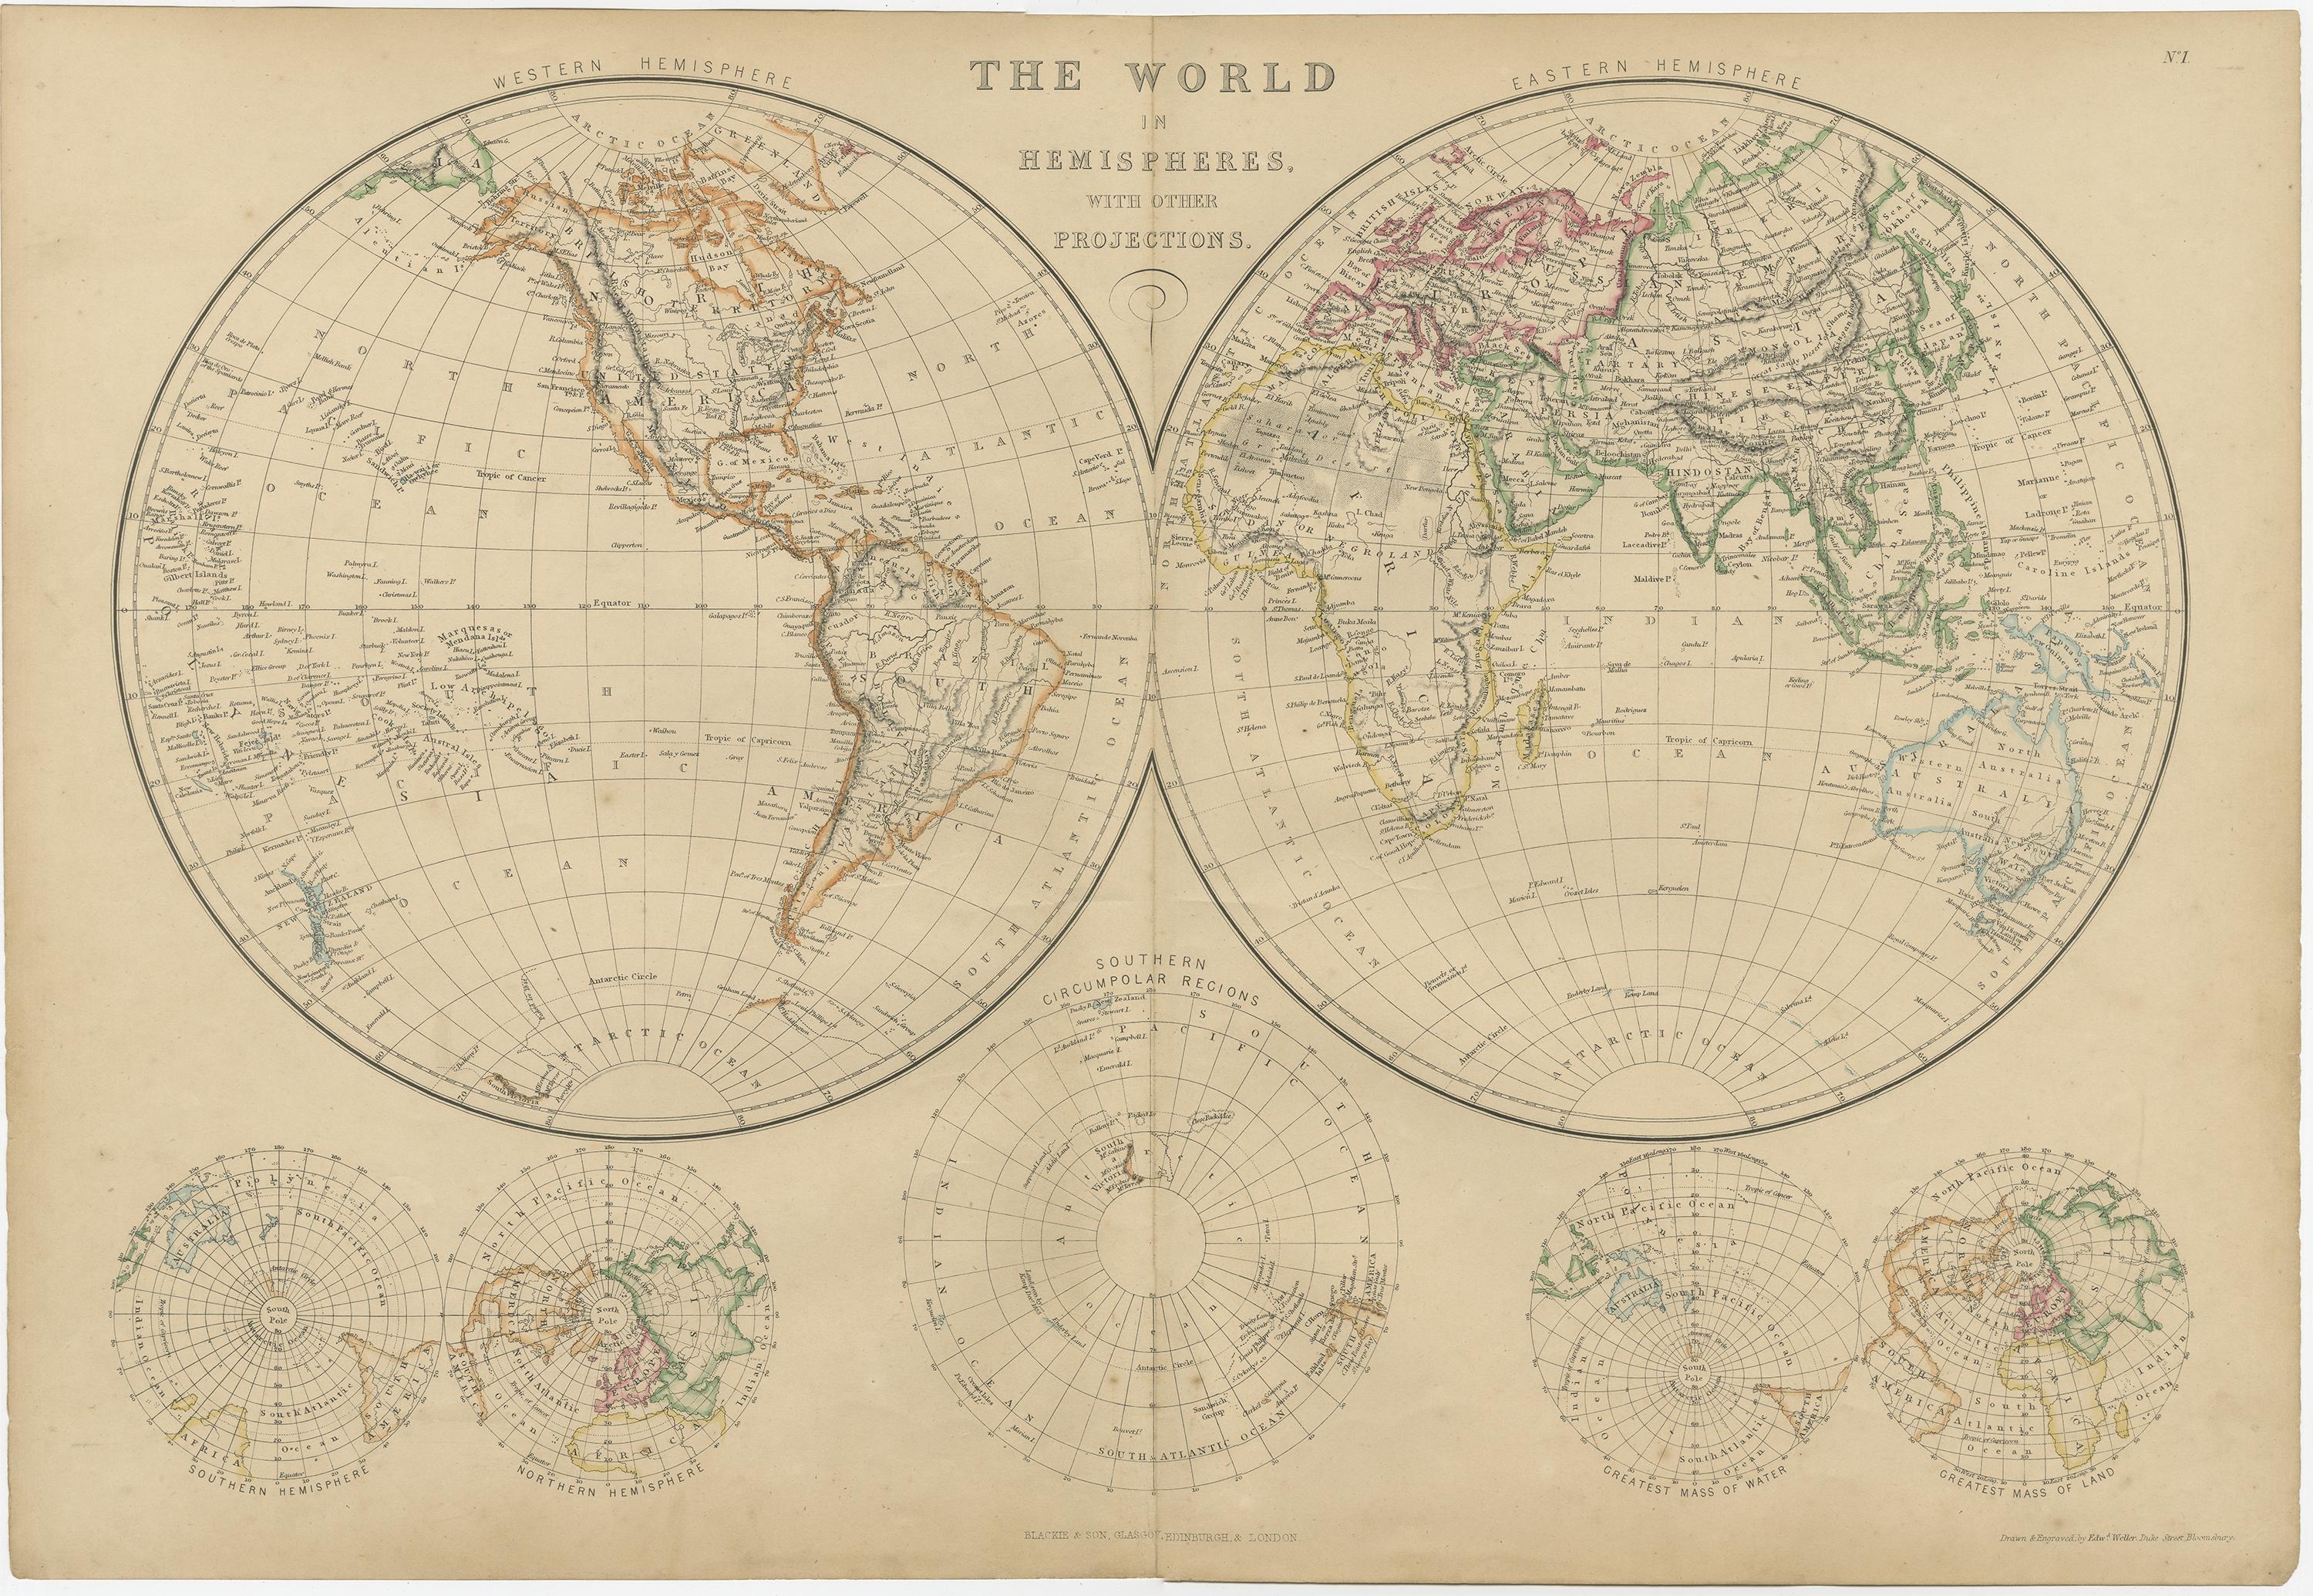 Antique map titled 'The World in Hemispheres with other projections'. Original antique map of The World. This map originates from ‘The Imperial Atlas of Modern Geography’. Published by W. G. Blackie, 1859.